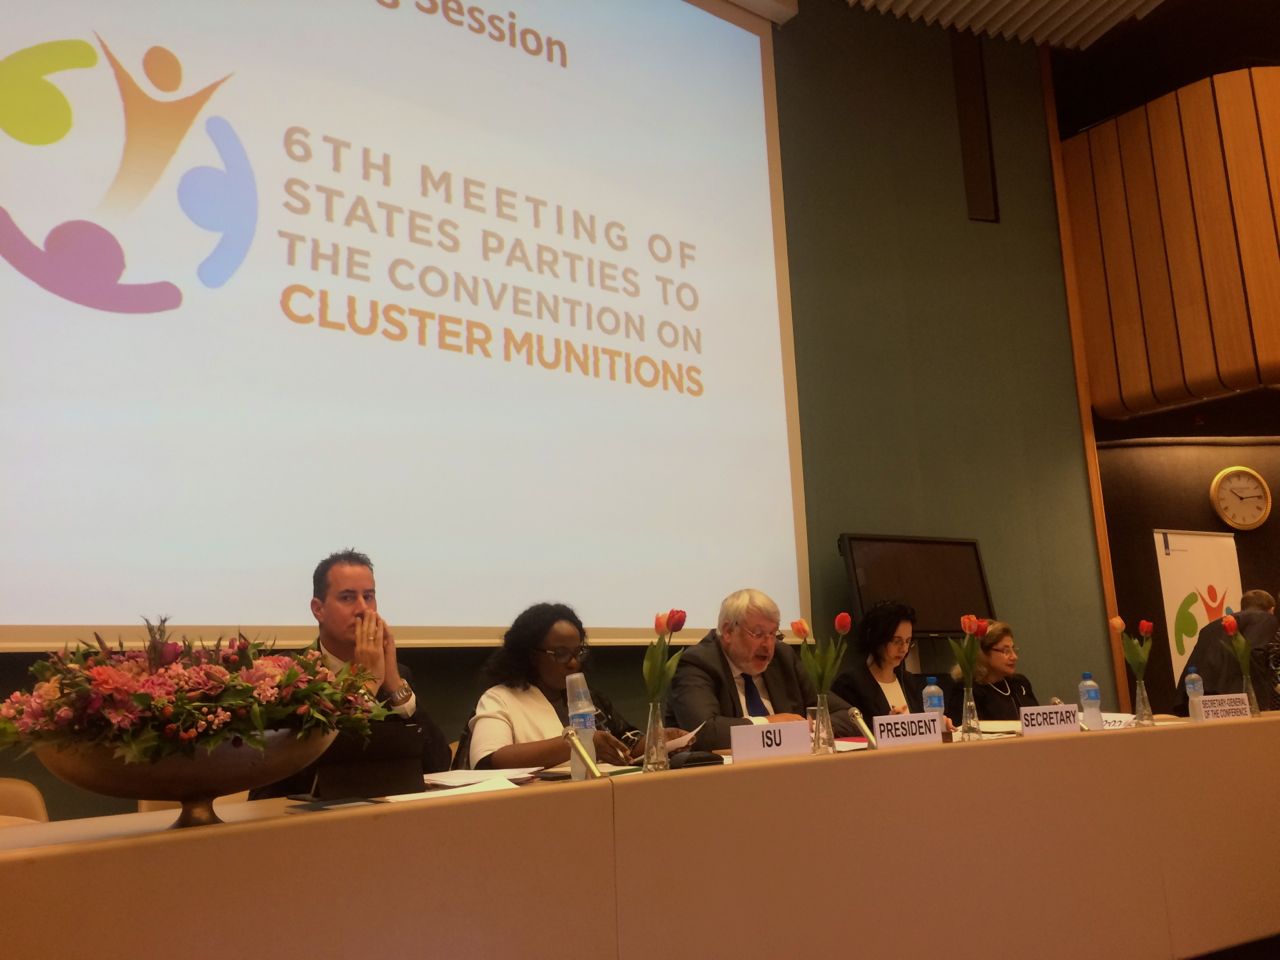 6MSP team Netherlands convention on cluster munitions